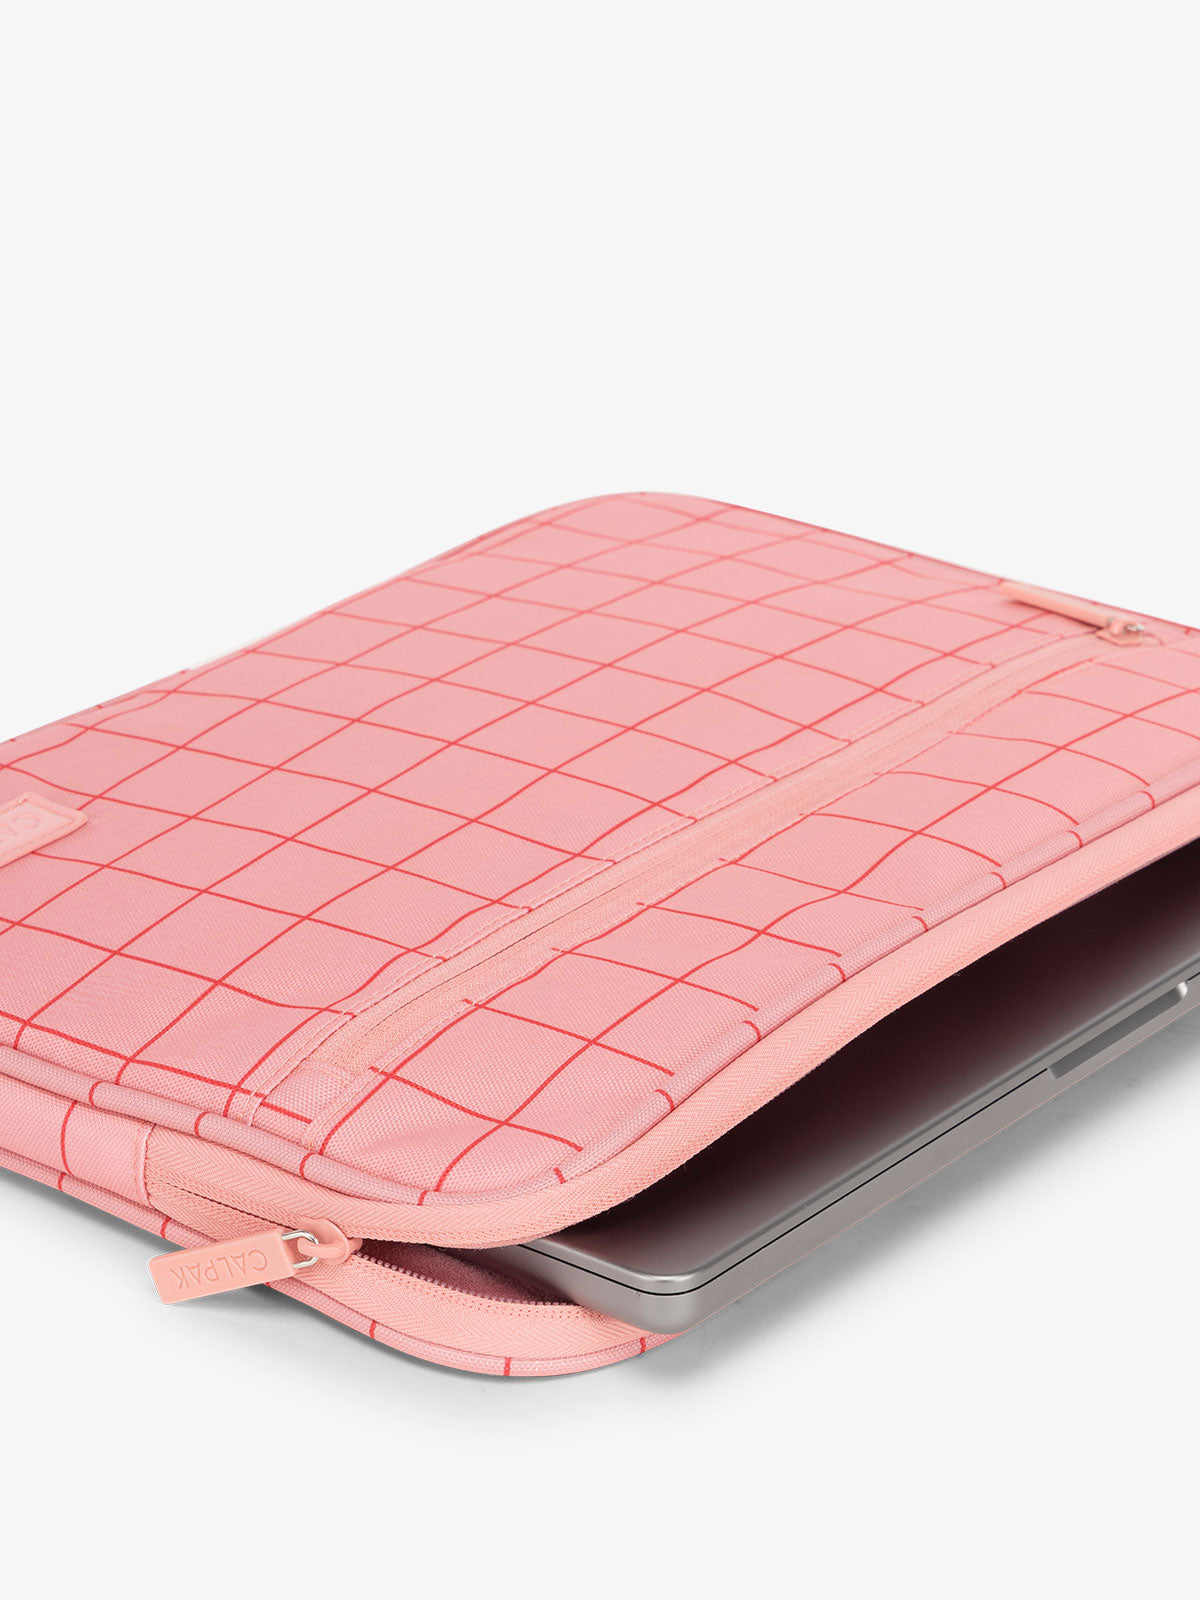 CALPAK 13-14 Inch Laptop sleeve with protective pockets for work in pink grid